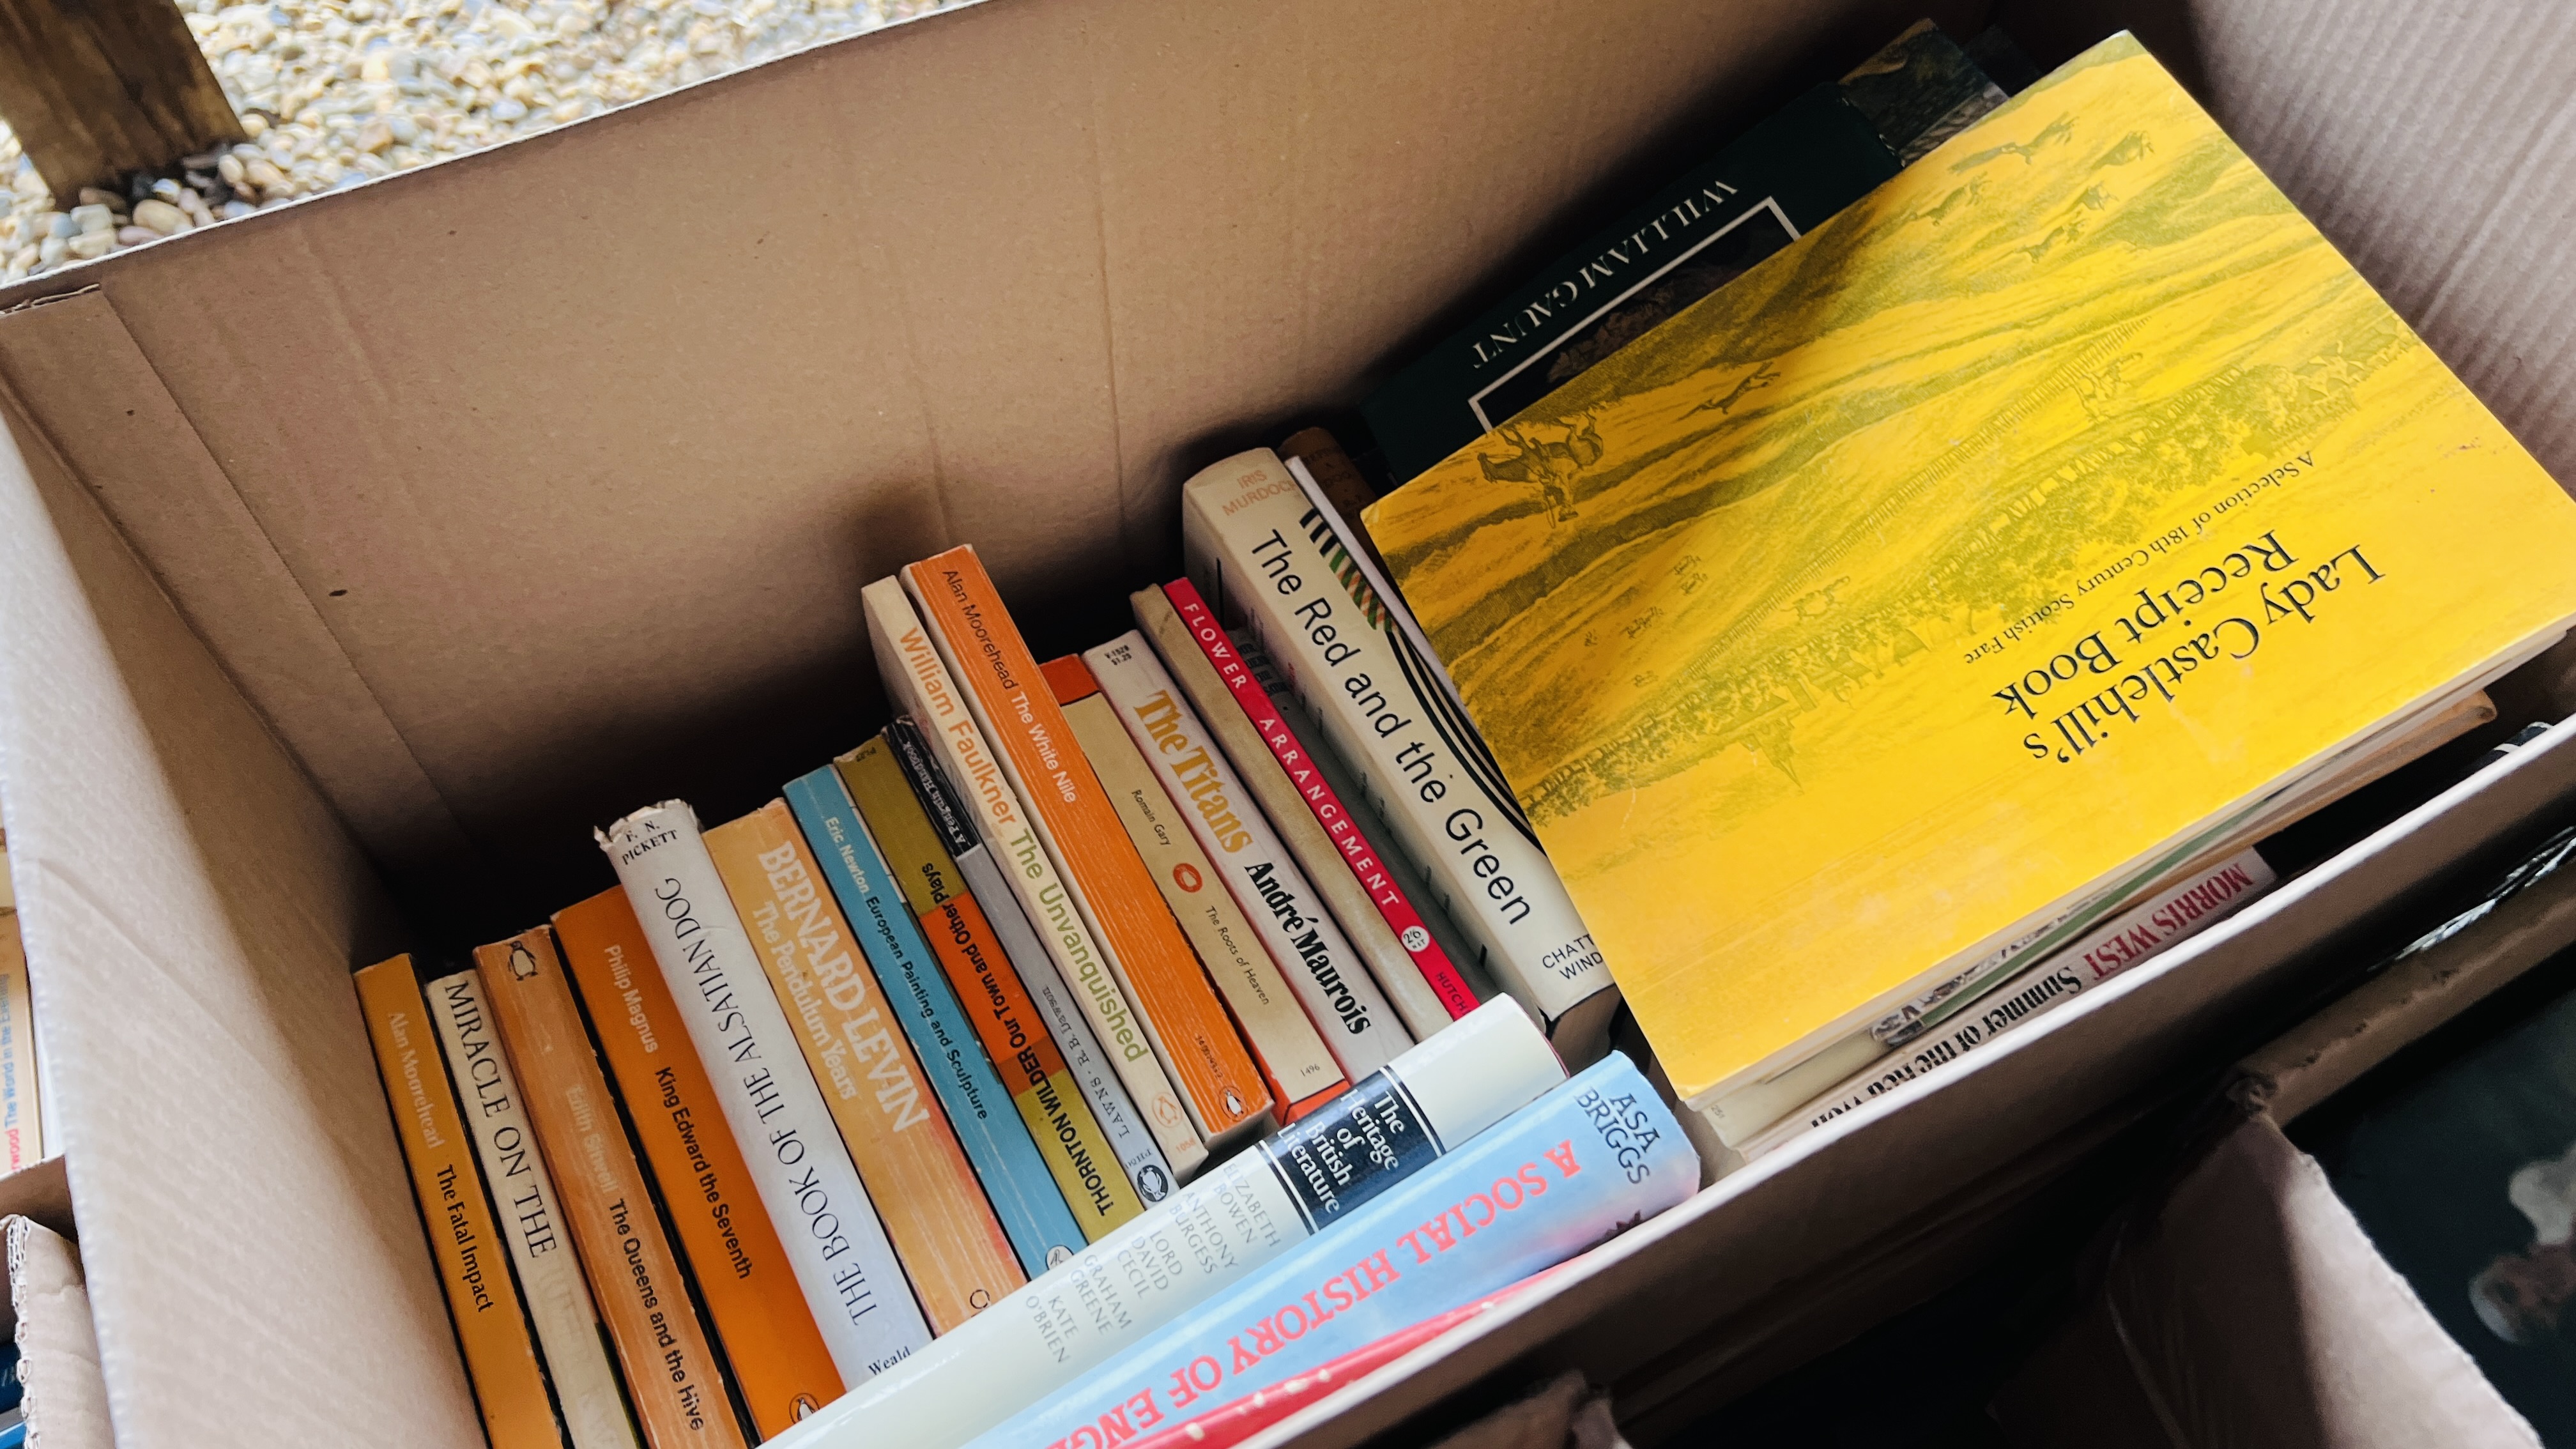 20 BOXES OF ASSORTED BOOKS - AS CLEARED TO INCLUDE NOVELS, REFERENCE, JAPANESE AND ORIENTAL BOOKS. - Image 20 of 21